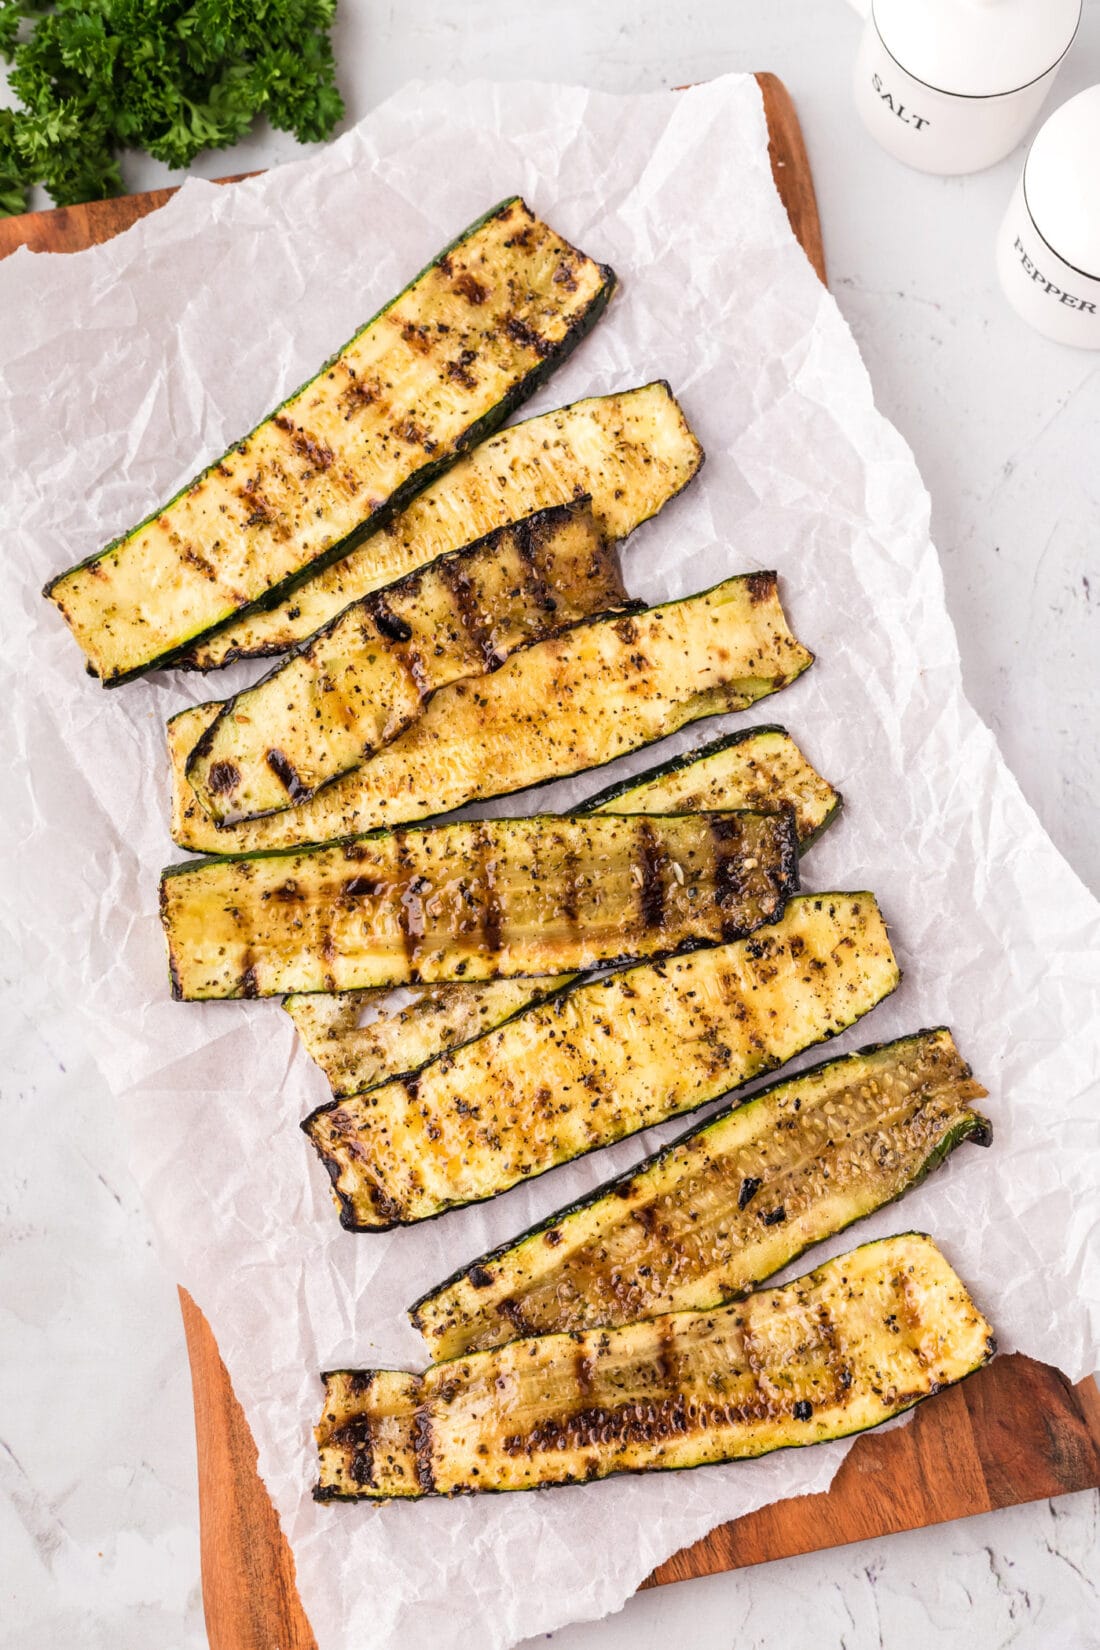 Grilled Zucchini on a wooden platter with parchment